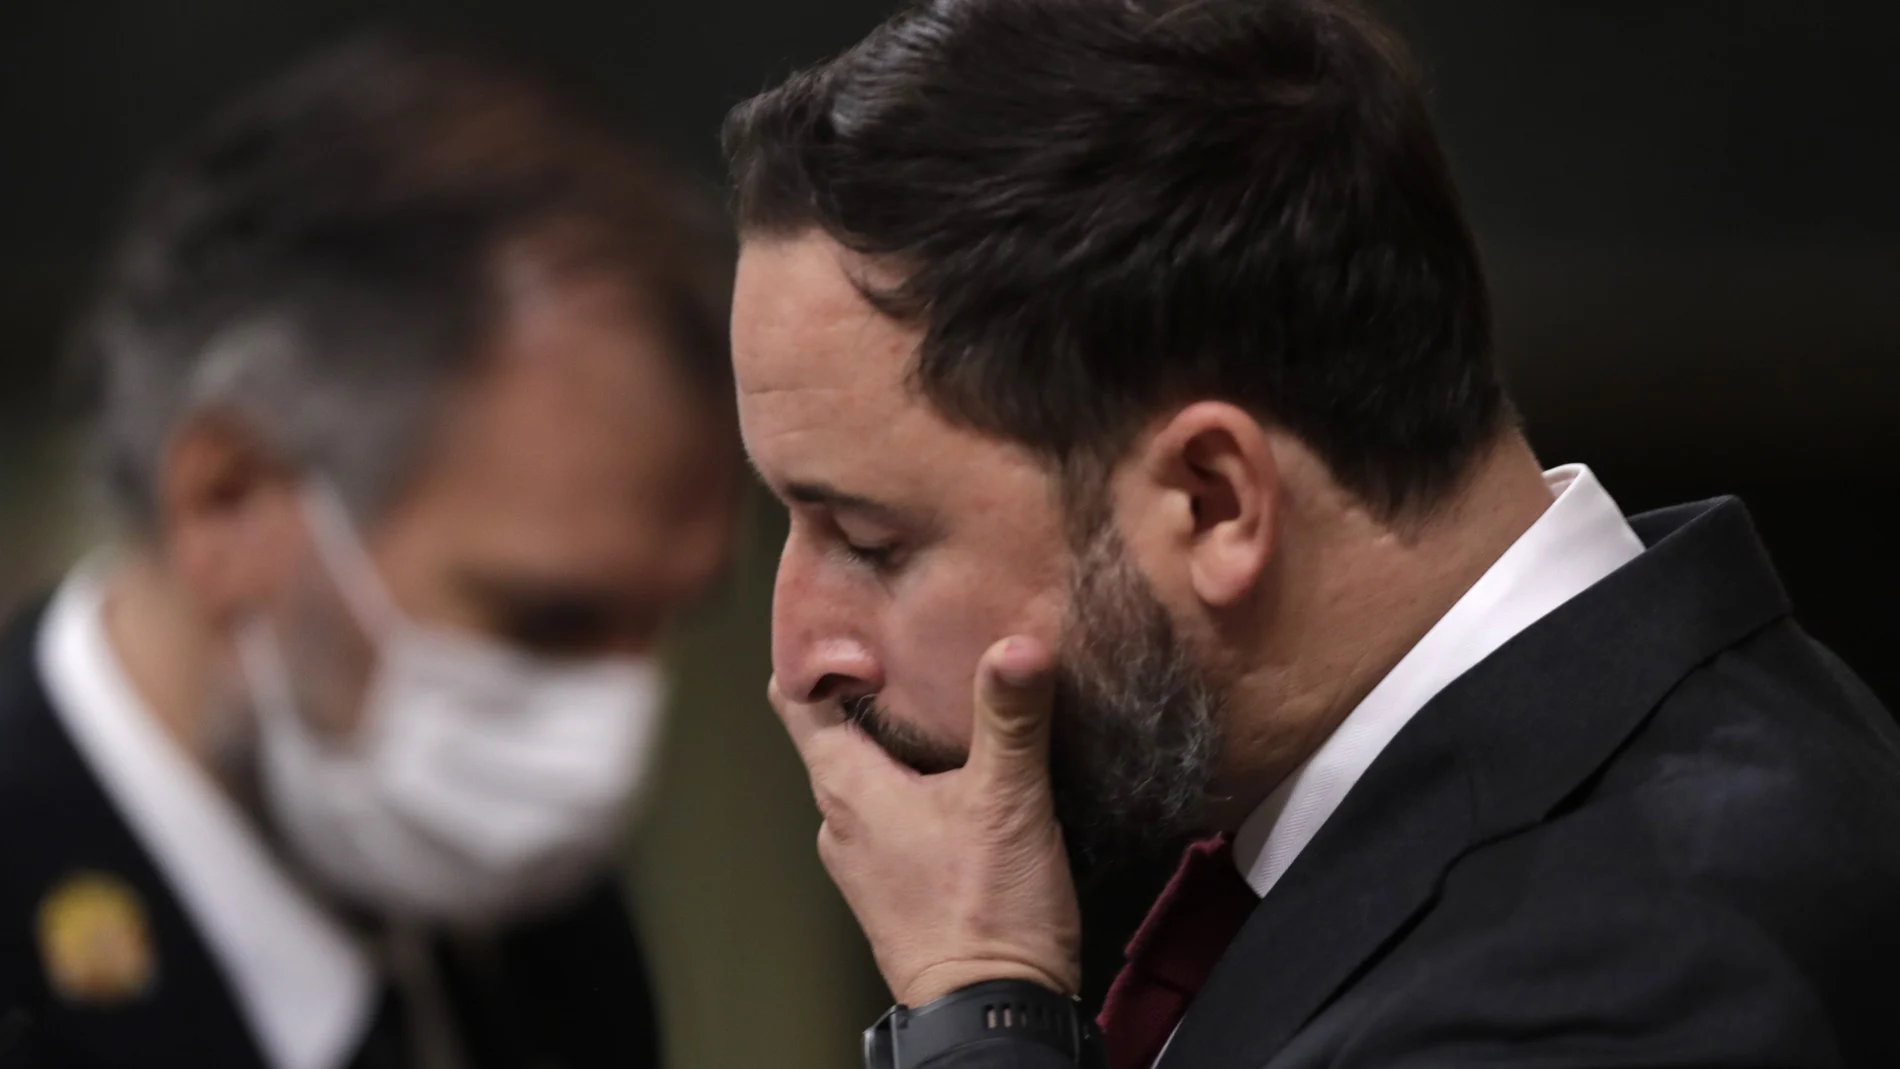 Vox party leader Santiago Abascal pauses while giving a speech during a parliamentary session in Madrid, Spain, Wednesday Oct. 21, 2020. Spanish Prime Minister Pedro Sanchez faces a no confidence vote in Parliament put forth by the far right opposition party VOX. (AP Photo/Manu Fernandez, Pool)